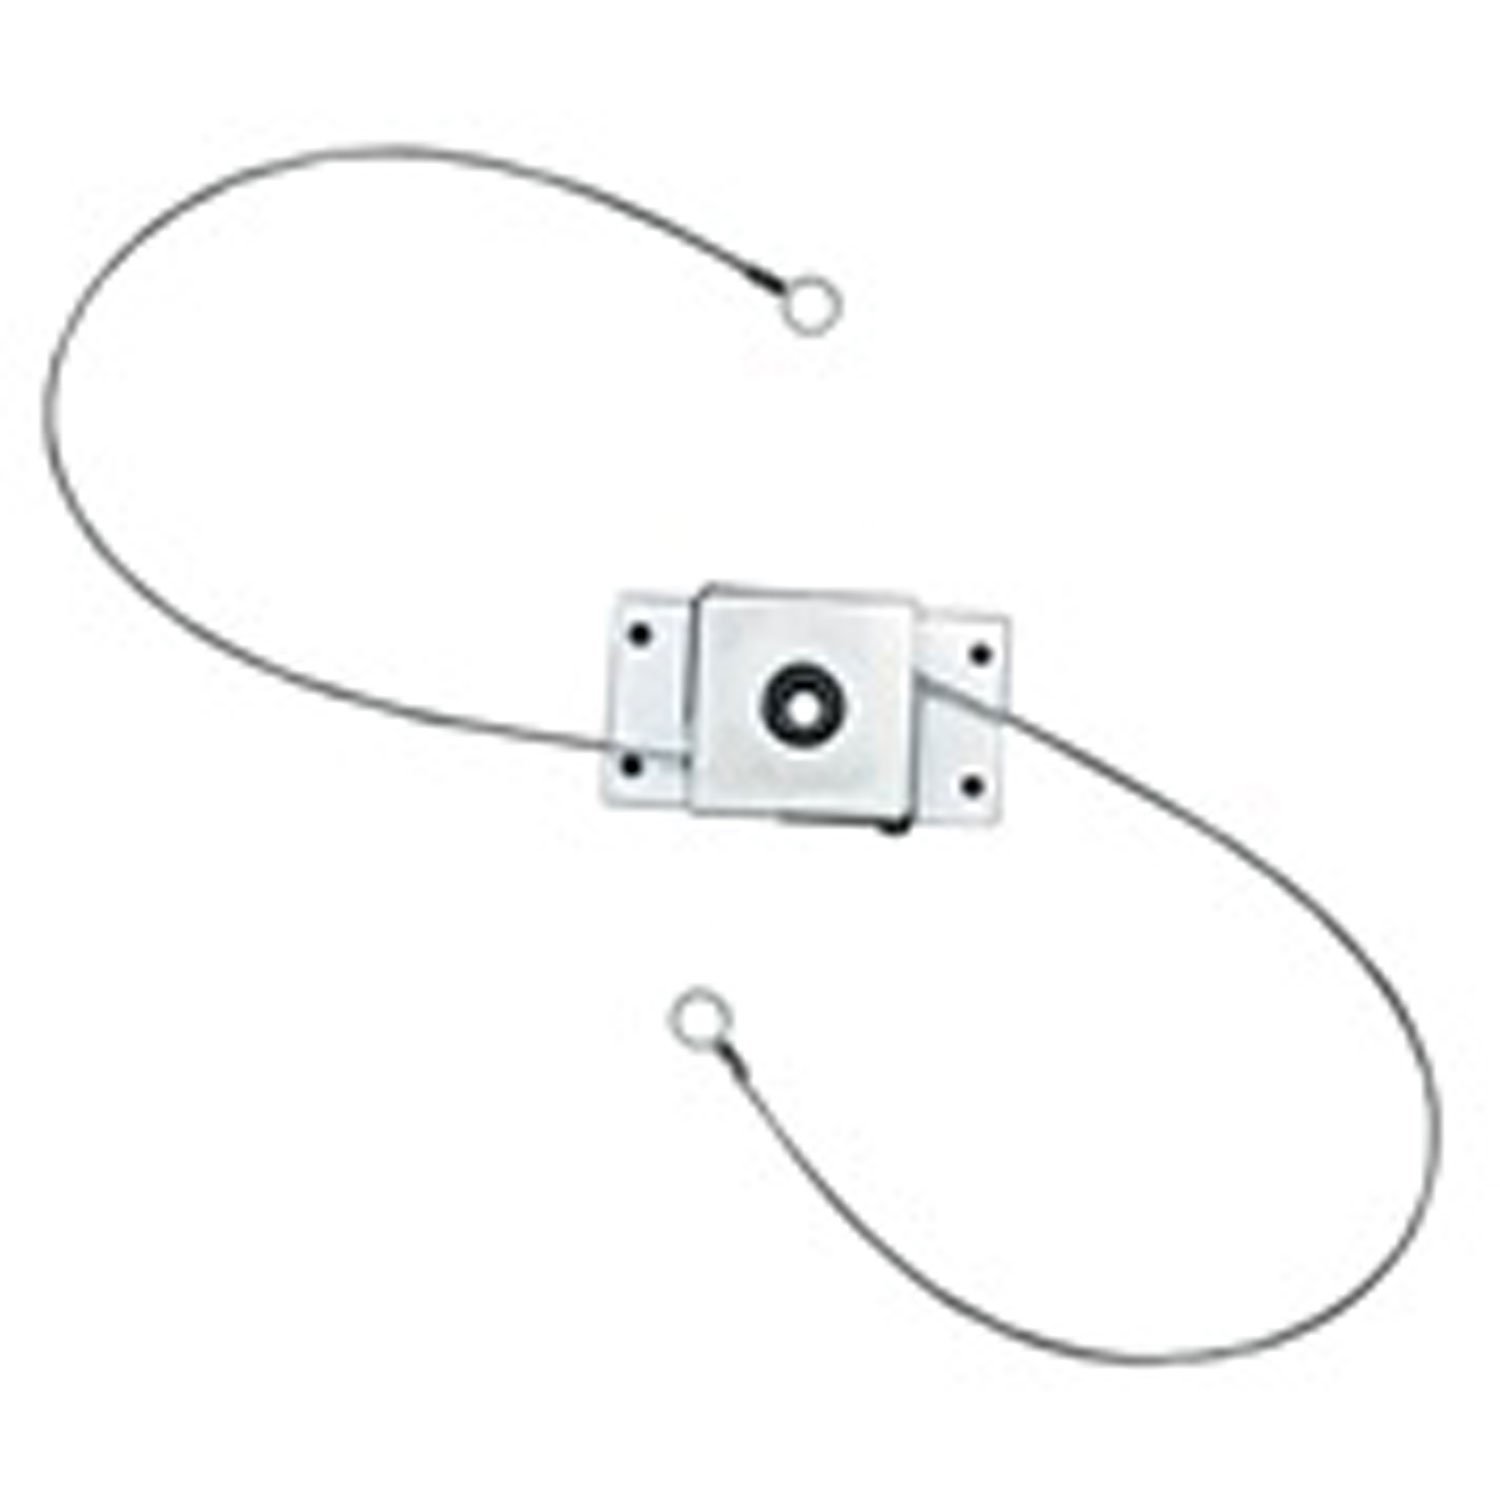 Replacement liftgate cable cam assembly from Omix-ADA, Fits hardtops on 76-86 Jeep CJ7 and 81-86 CJ8